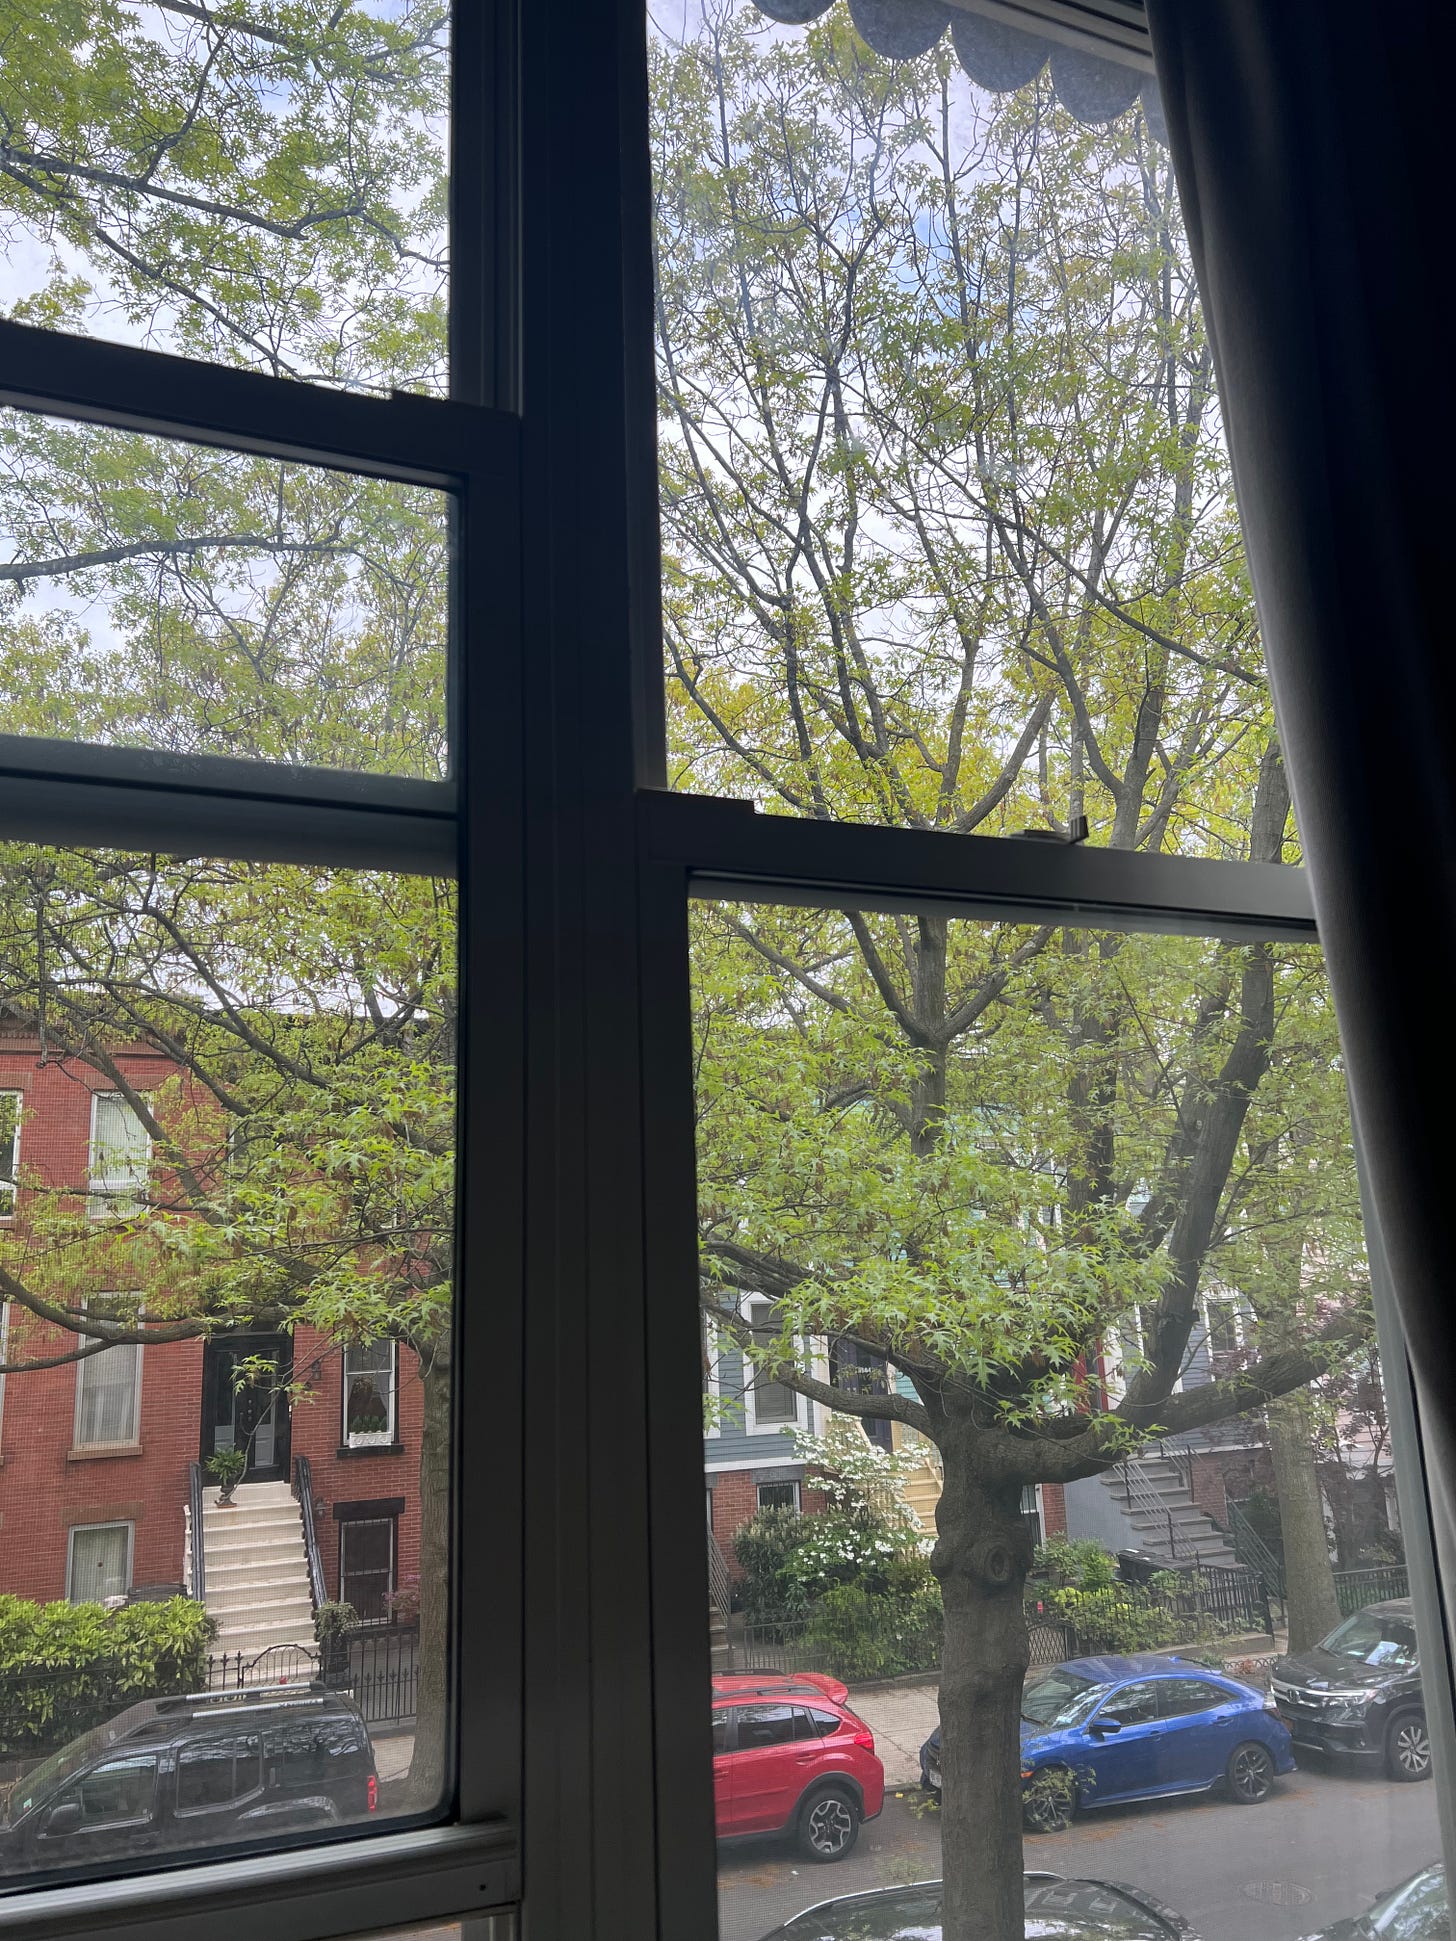 an oak tree on a city street, image crisscrossed by the panes of a window.